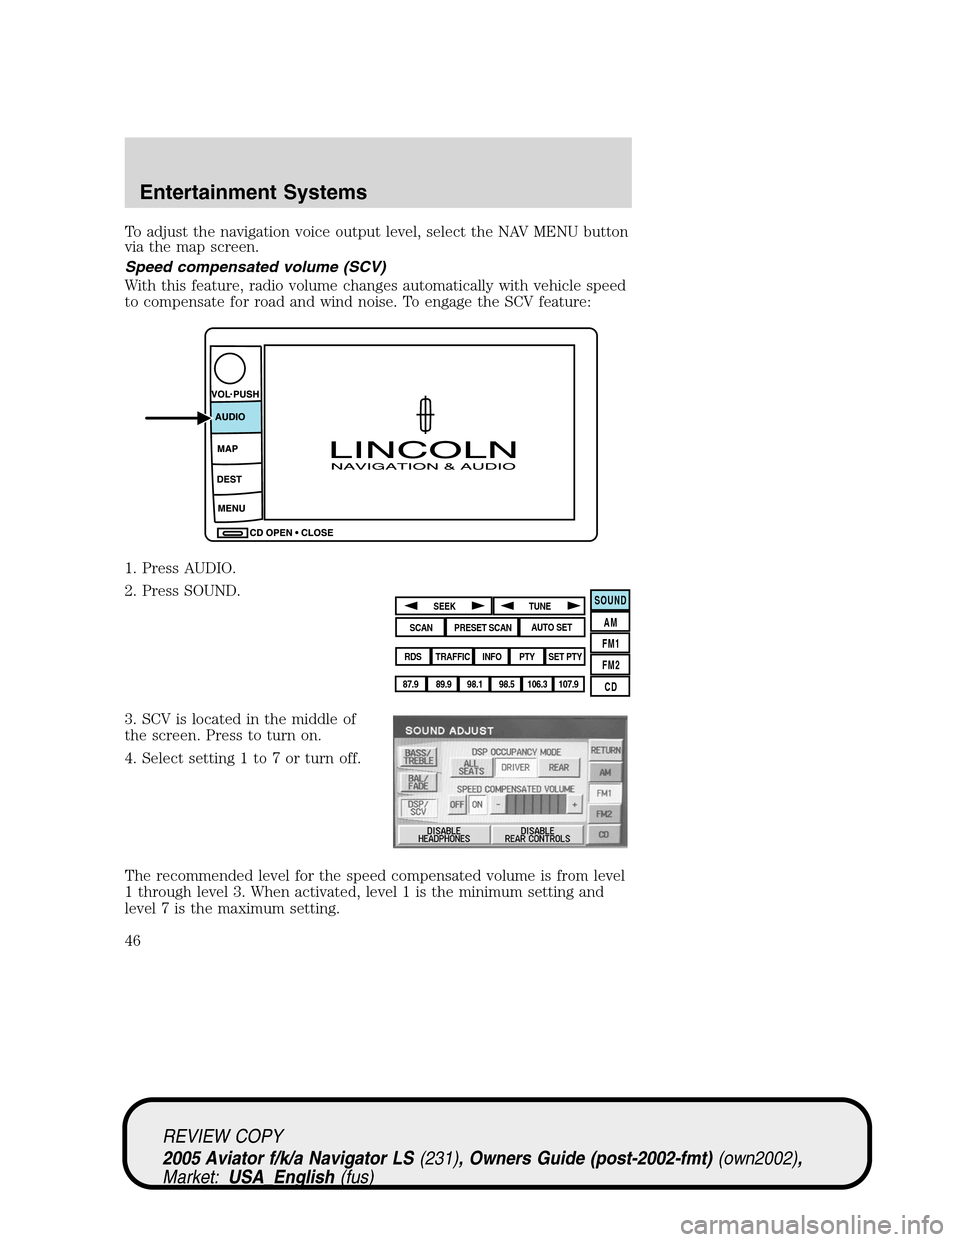 LINCOLN AVIATOR 2005  Owners Manual To adjust the navigation voice output level, select the NAV MENU button
via the map screen.
Speed compensated volume (SCV)
With this feature, radio volume changes automatically with vehicle speed
to c